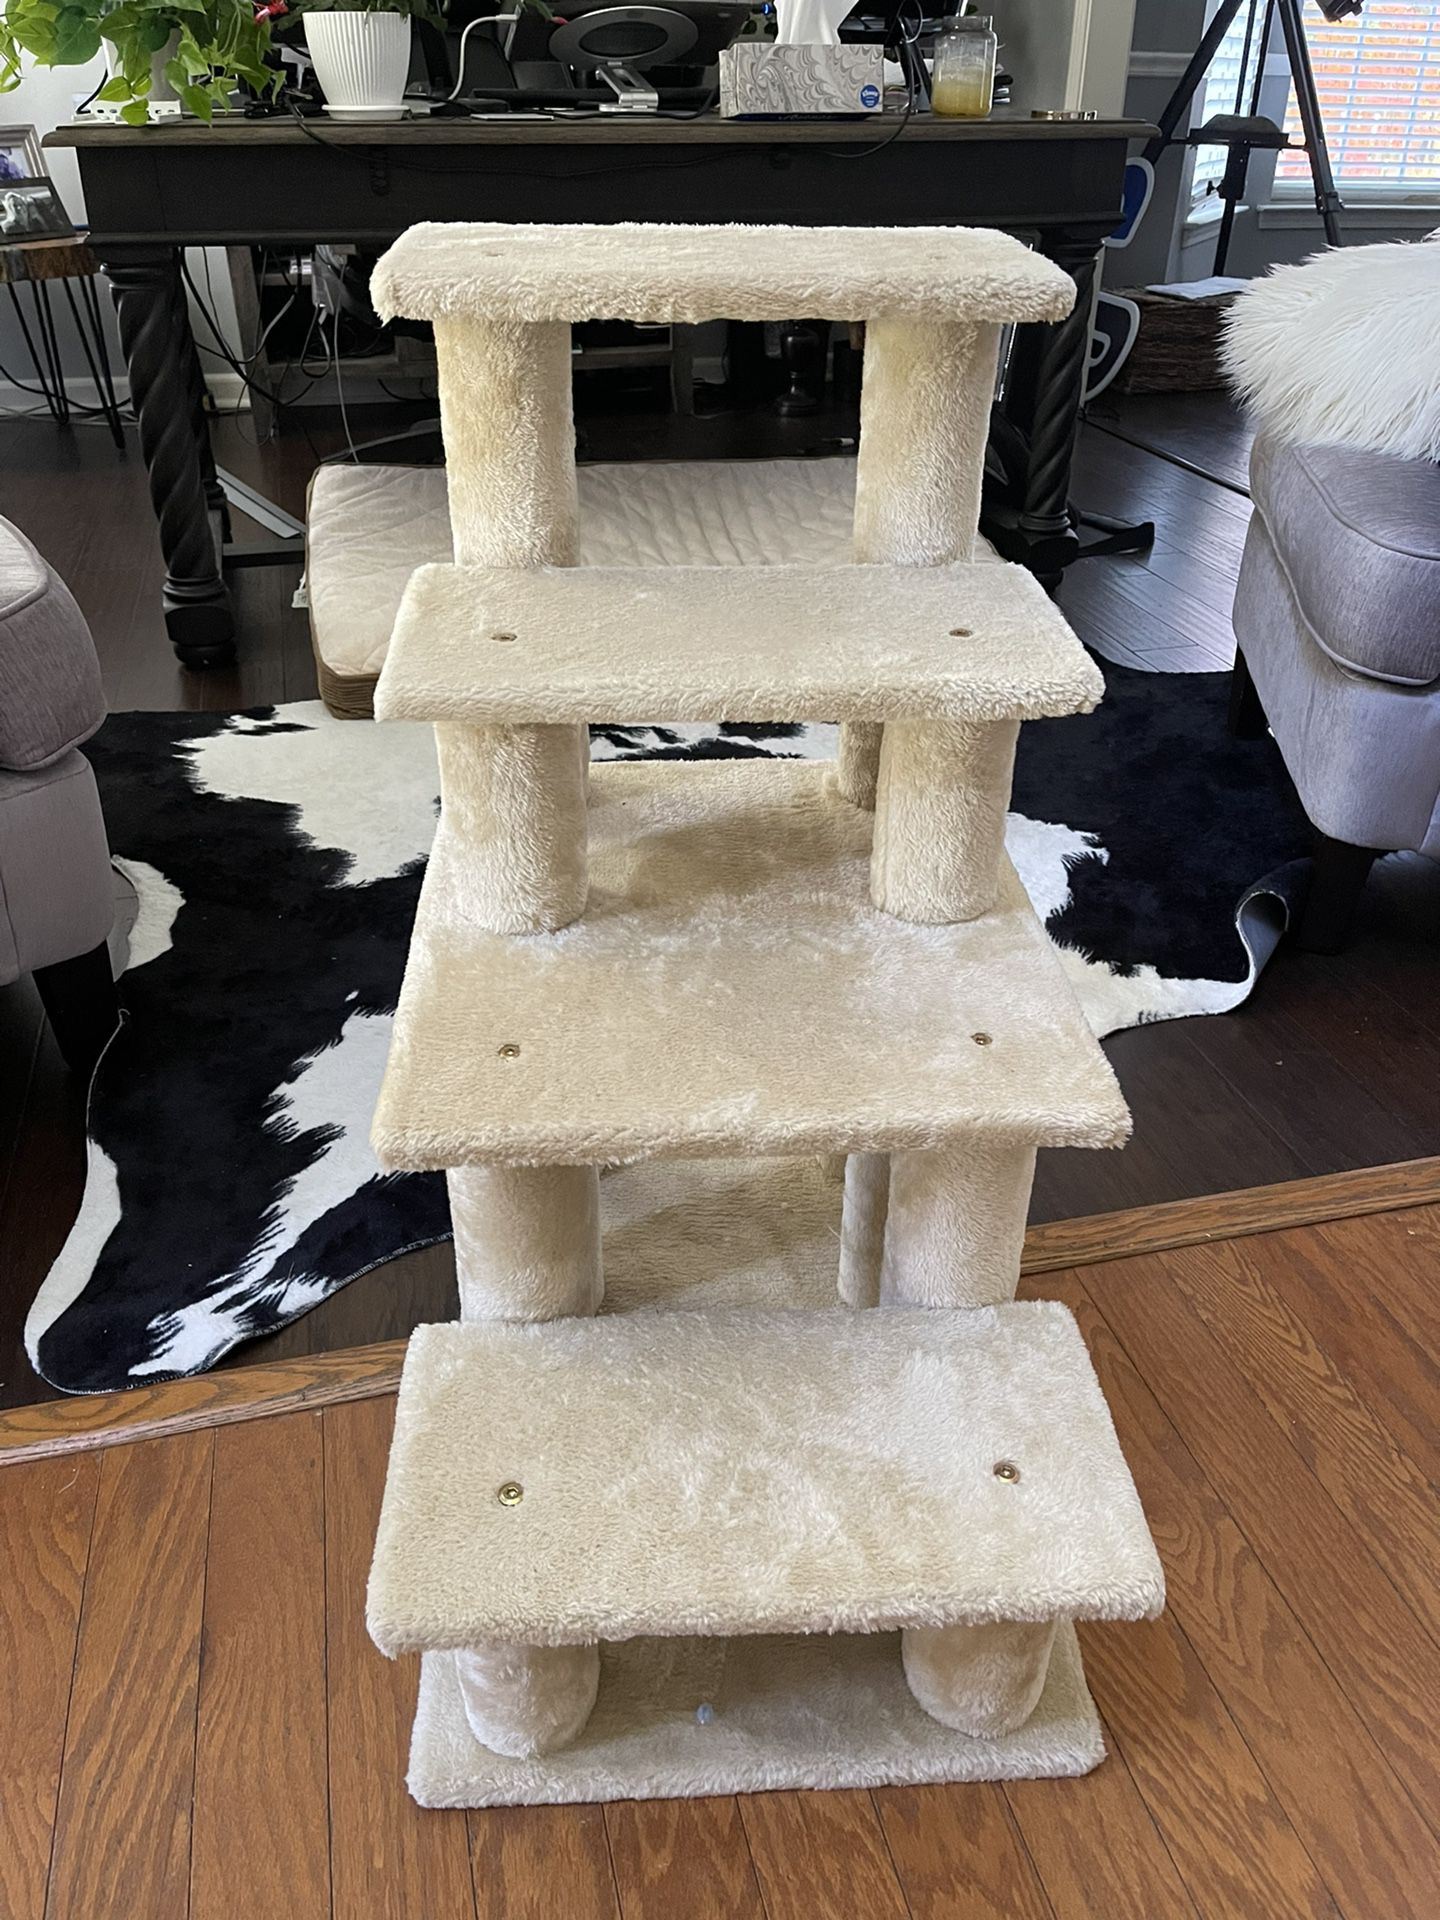 Multi-step Pet Stairs For High Beds Or Sofas